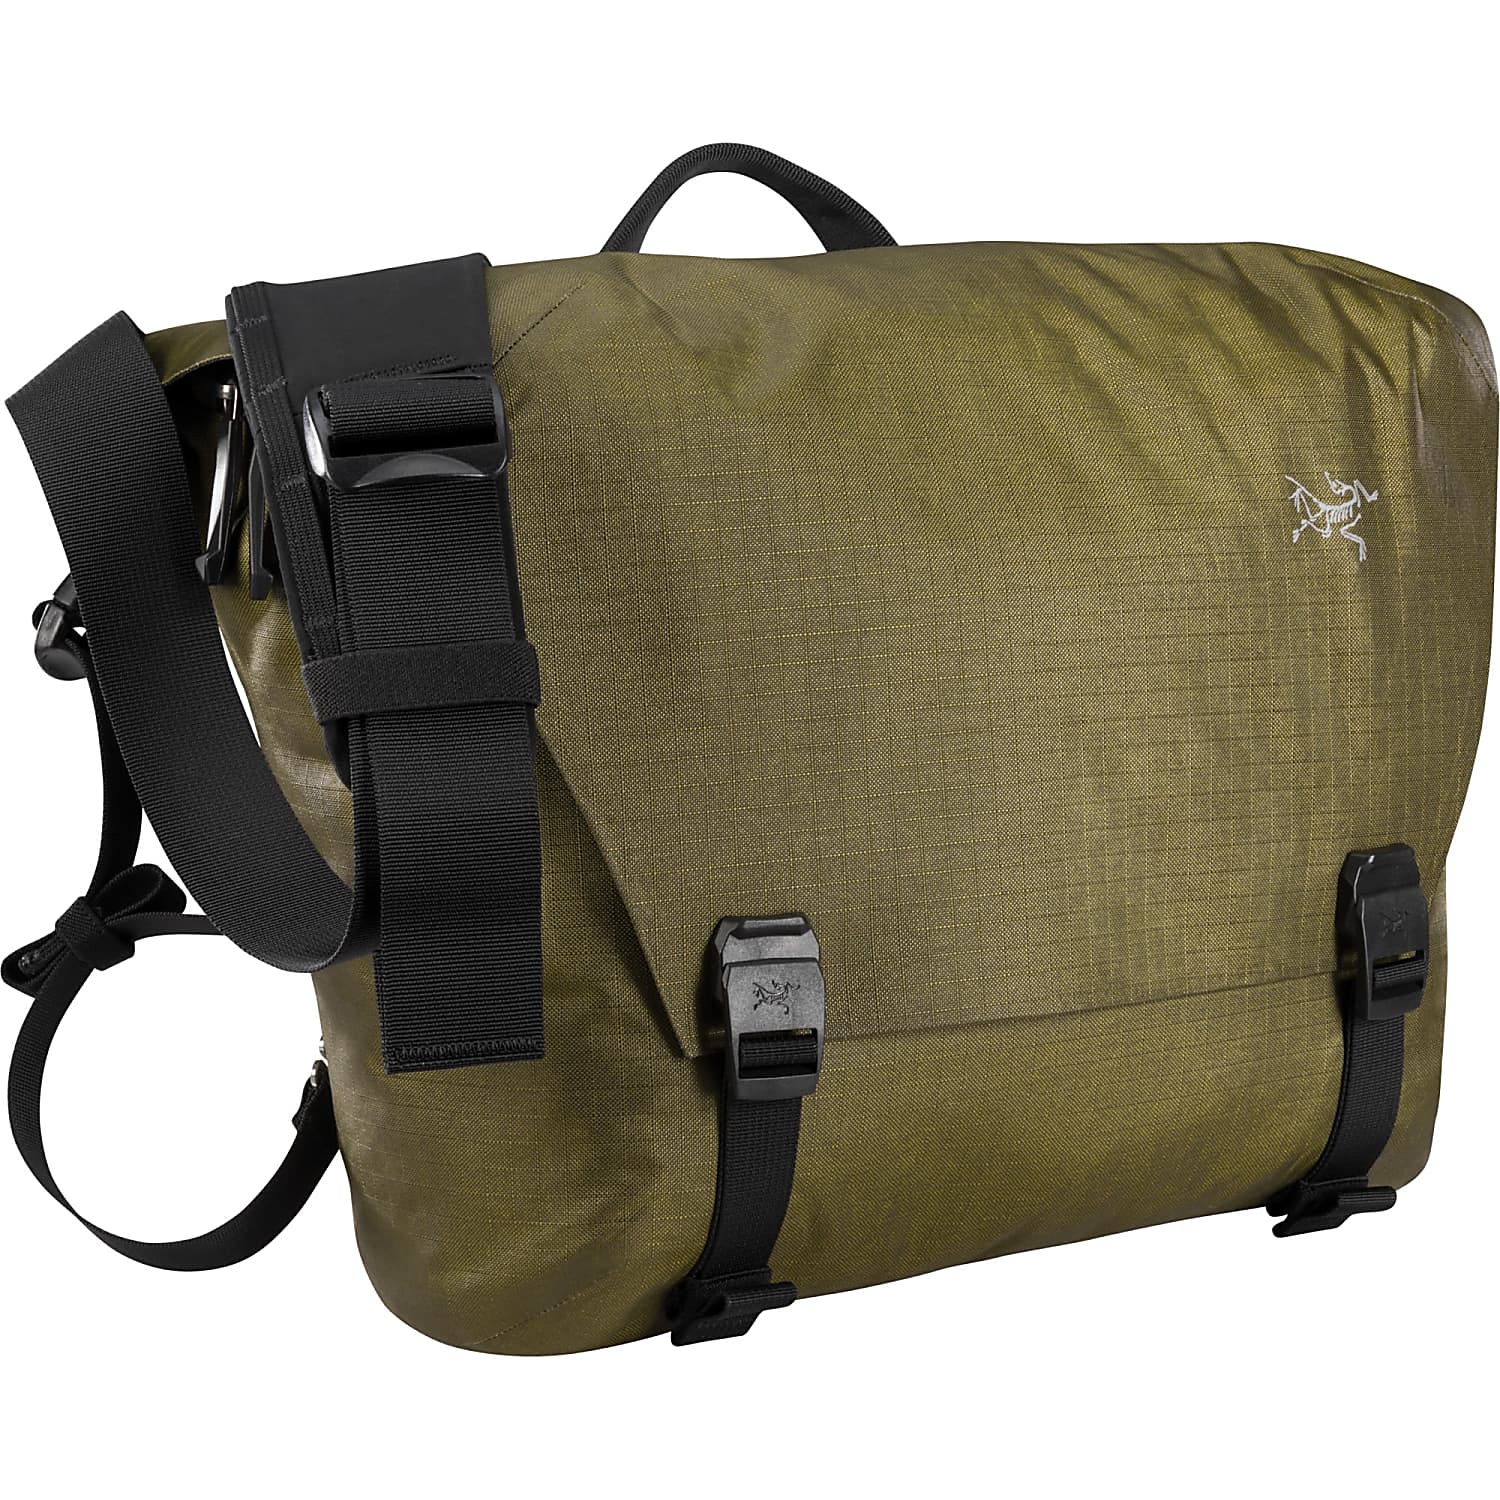 Arcteryx GRANVILLE 10 COURIER BAG, Bushwhack - Free Shipping